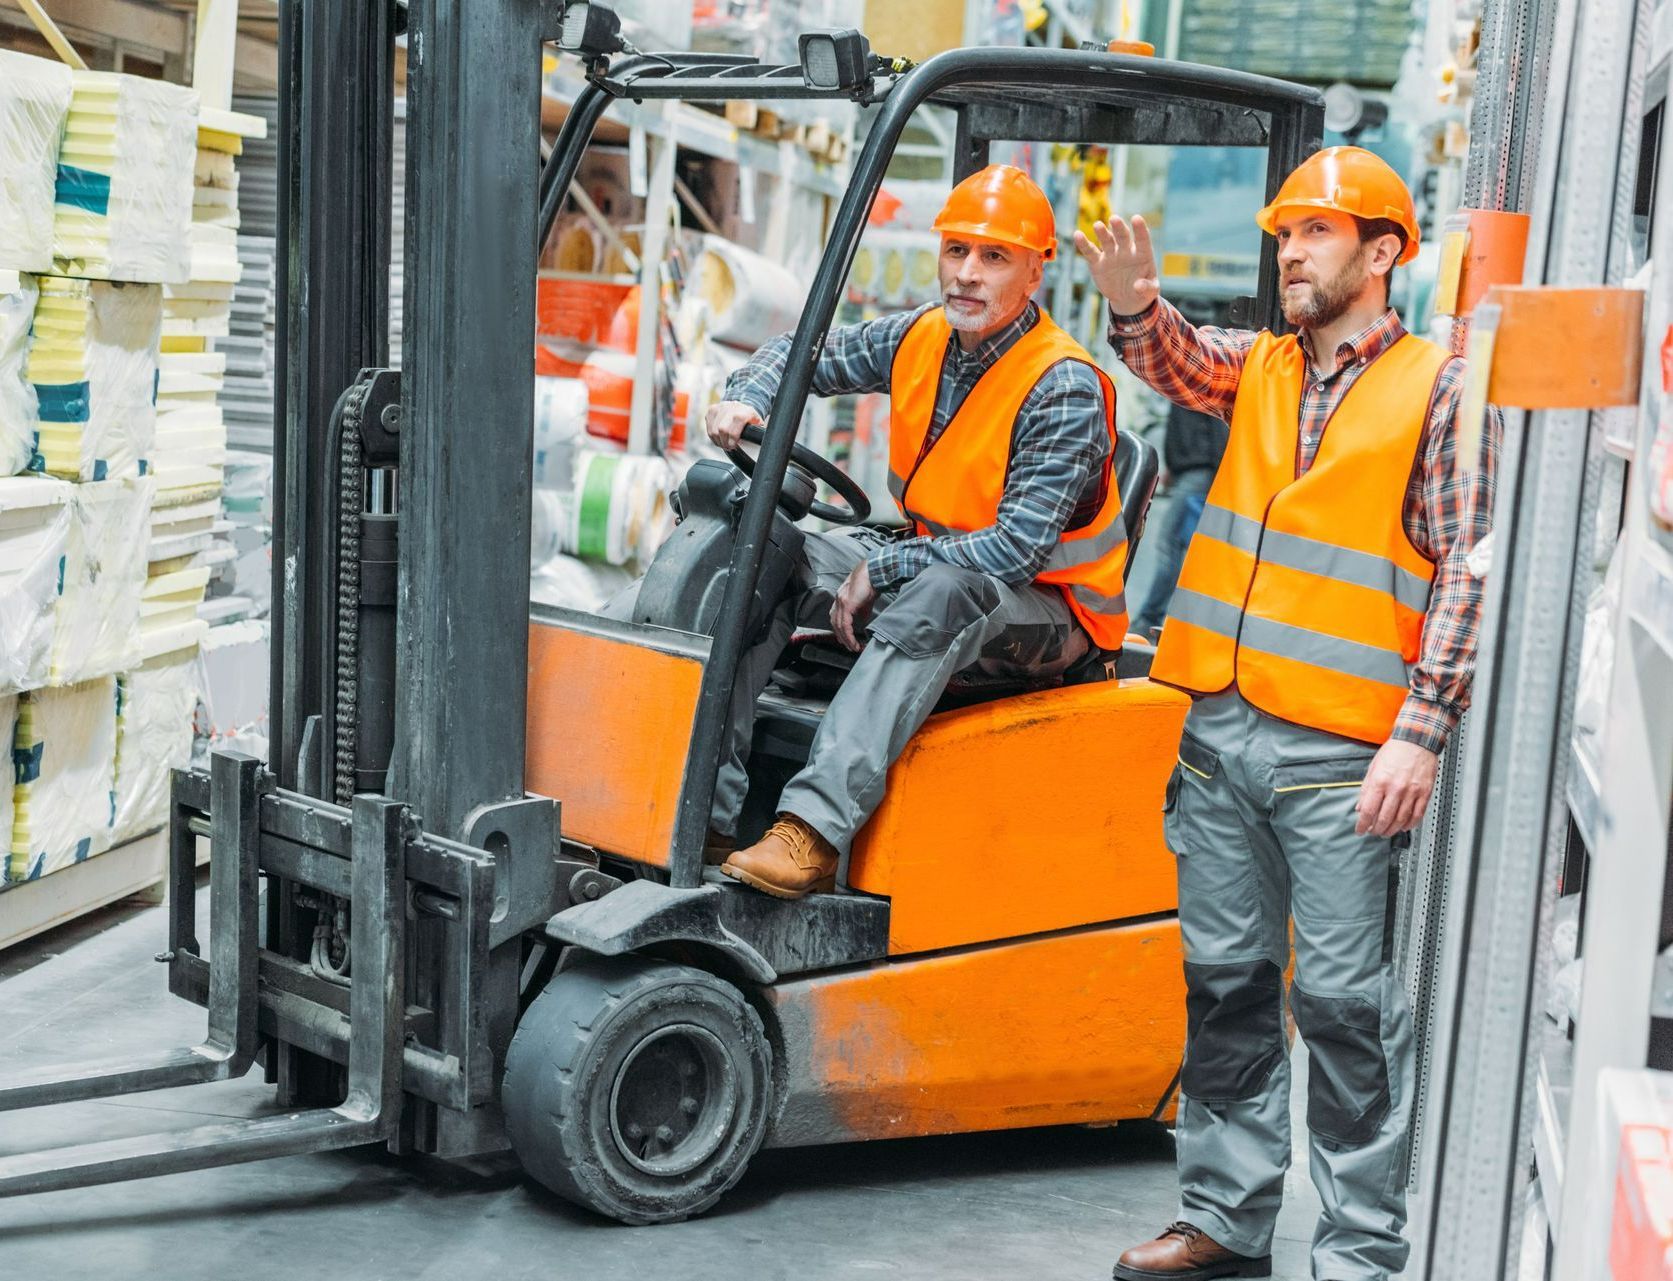 Combilift forklift being operated by man in high-vis coat